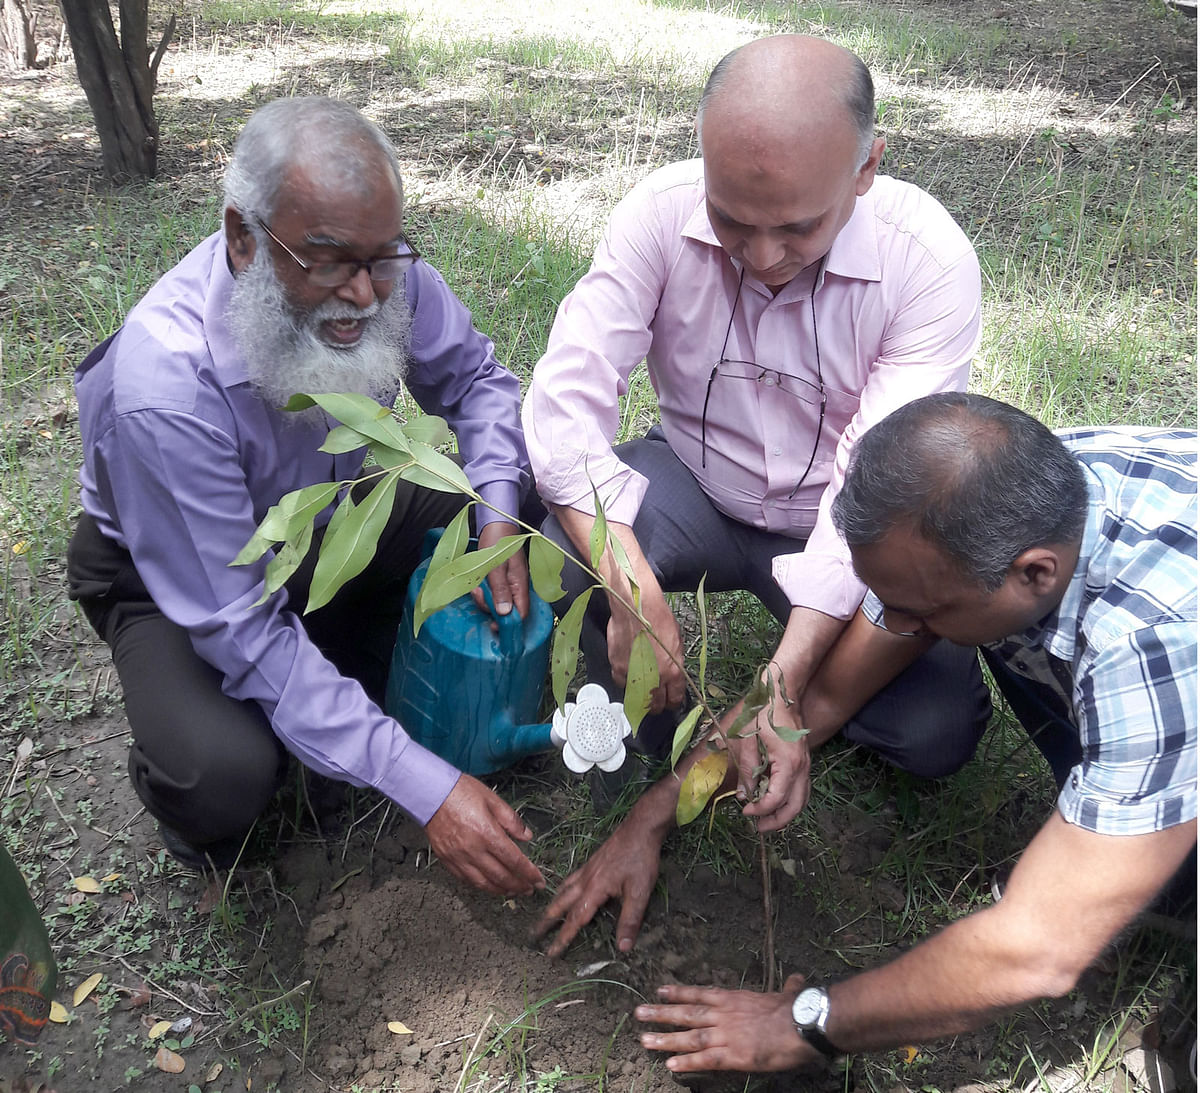 Bangladesh Society of Radiology and Imaging (BSRI) recently organised a tree plantation campaign at Dhaka Medical College Hospital with the motto ‘Plant a tree, save the planet’.